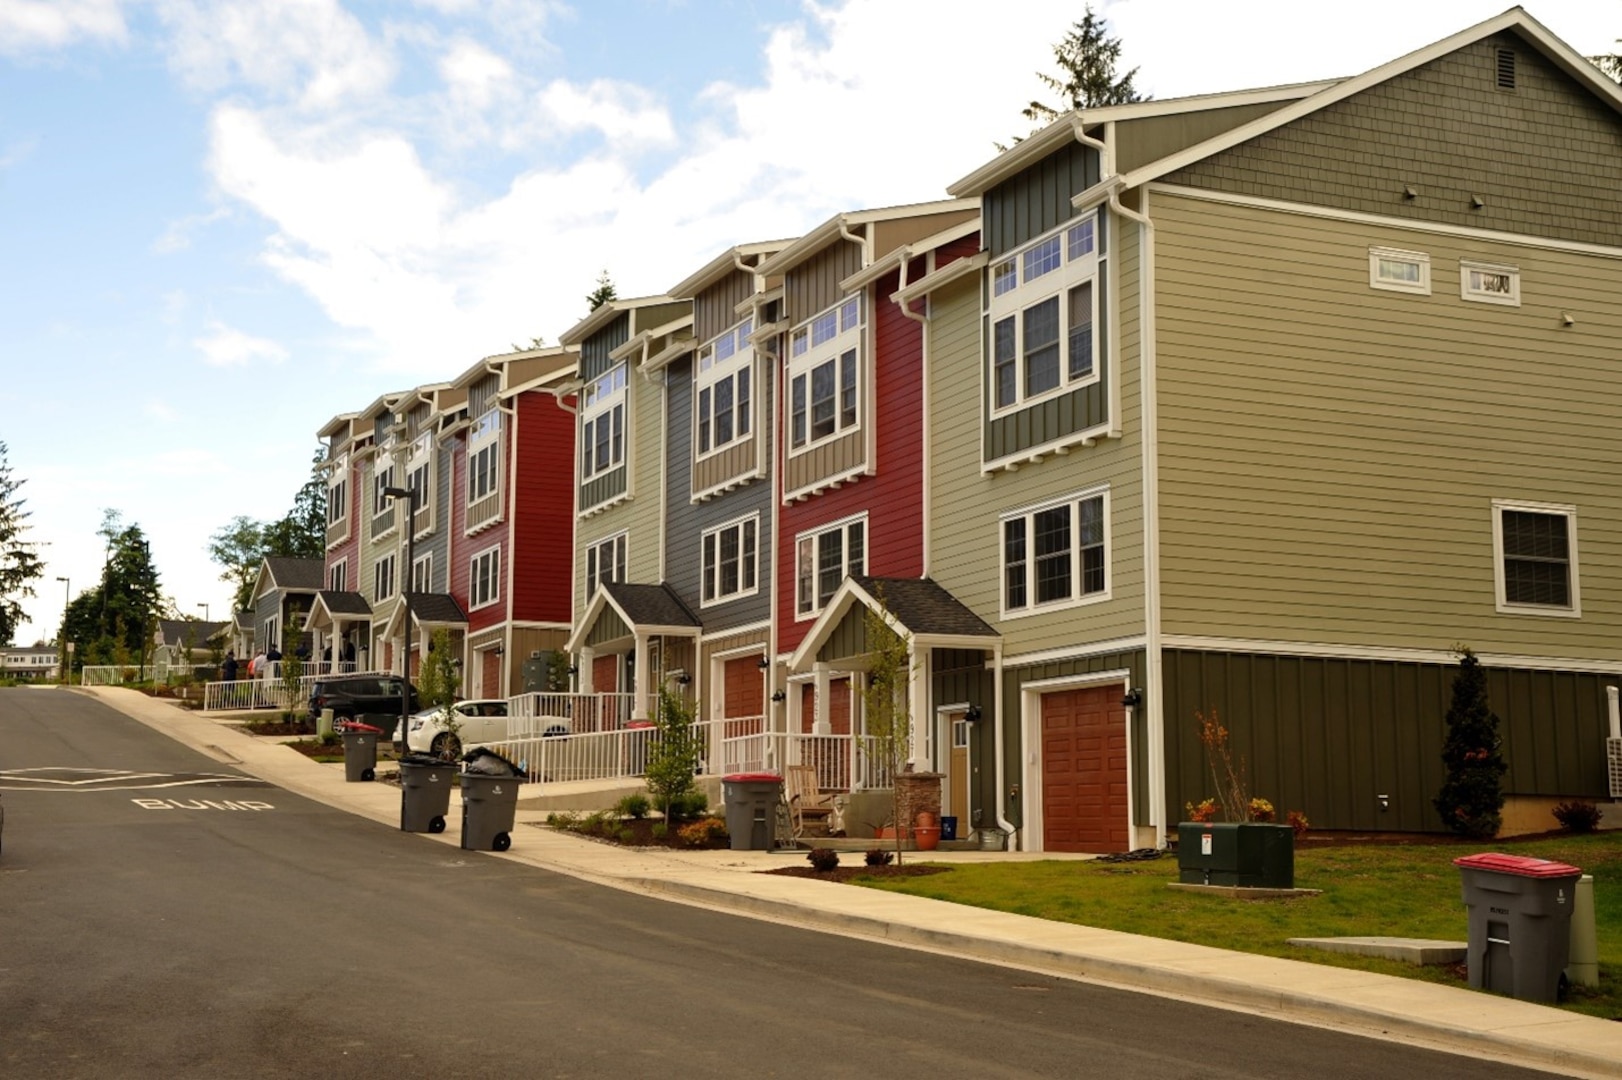 Twelve new housing units have been added to Culp Court within the Coast Guard Triumph Housing Complex in Astoria, Ore., and families can begin moving in June 27, 2019. The 12 new units plus a maintenance and operations building complete phase II of a housing project that has cost a total of $19.3 million to complete. (U.S. Coast Guard photo by Petty Officer 3rd Class Trevor Lilburn.)